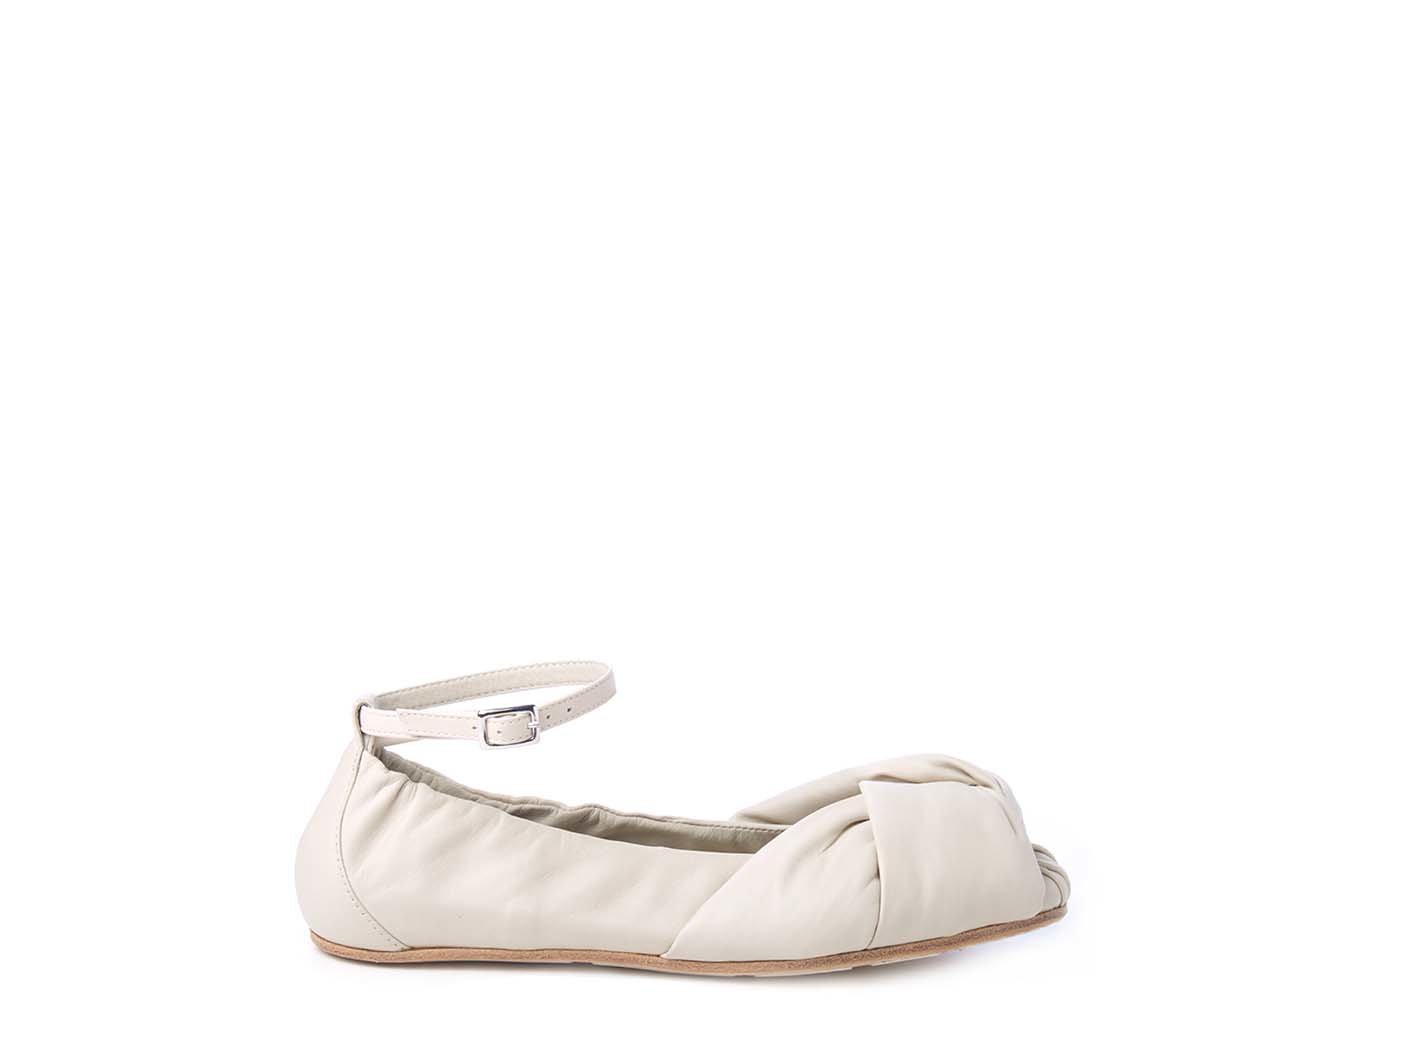 Ballerina flats in soft leather with string